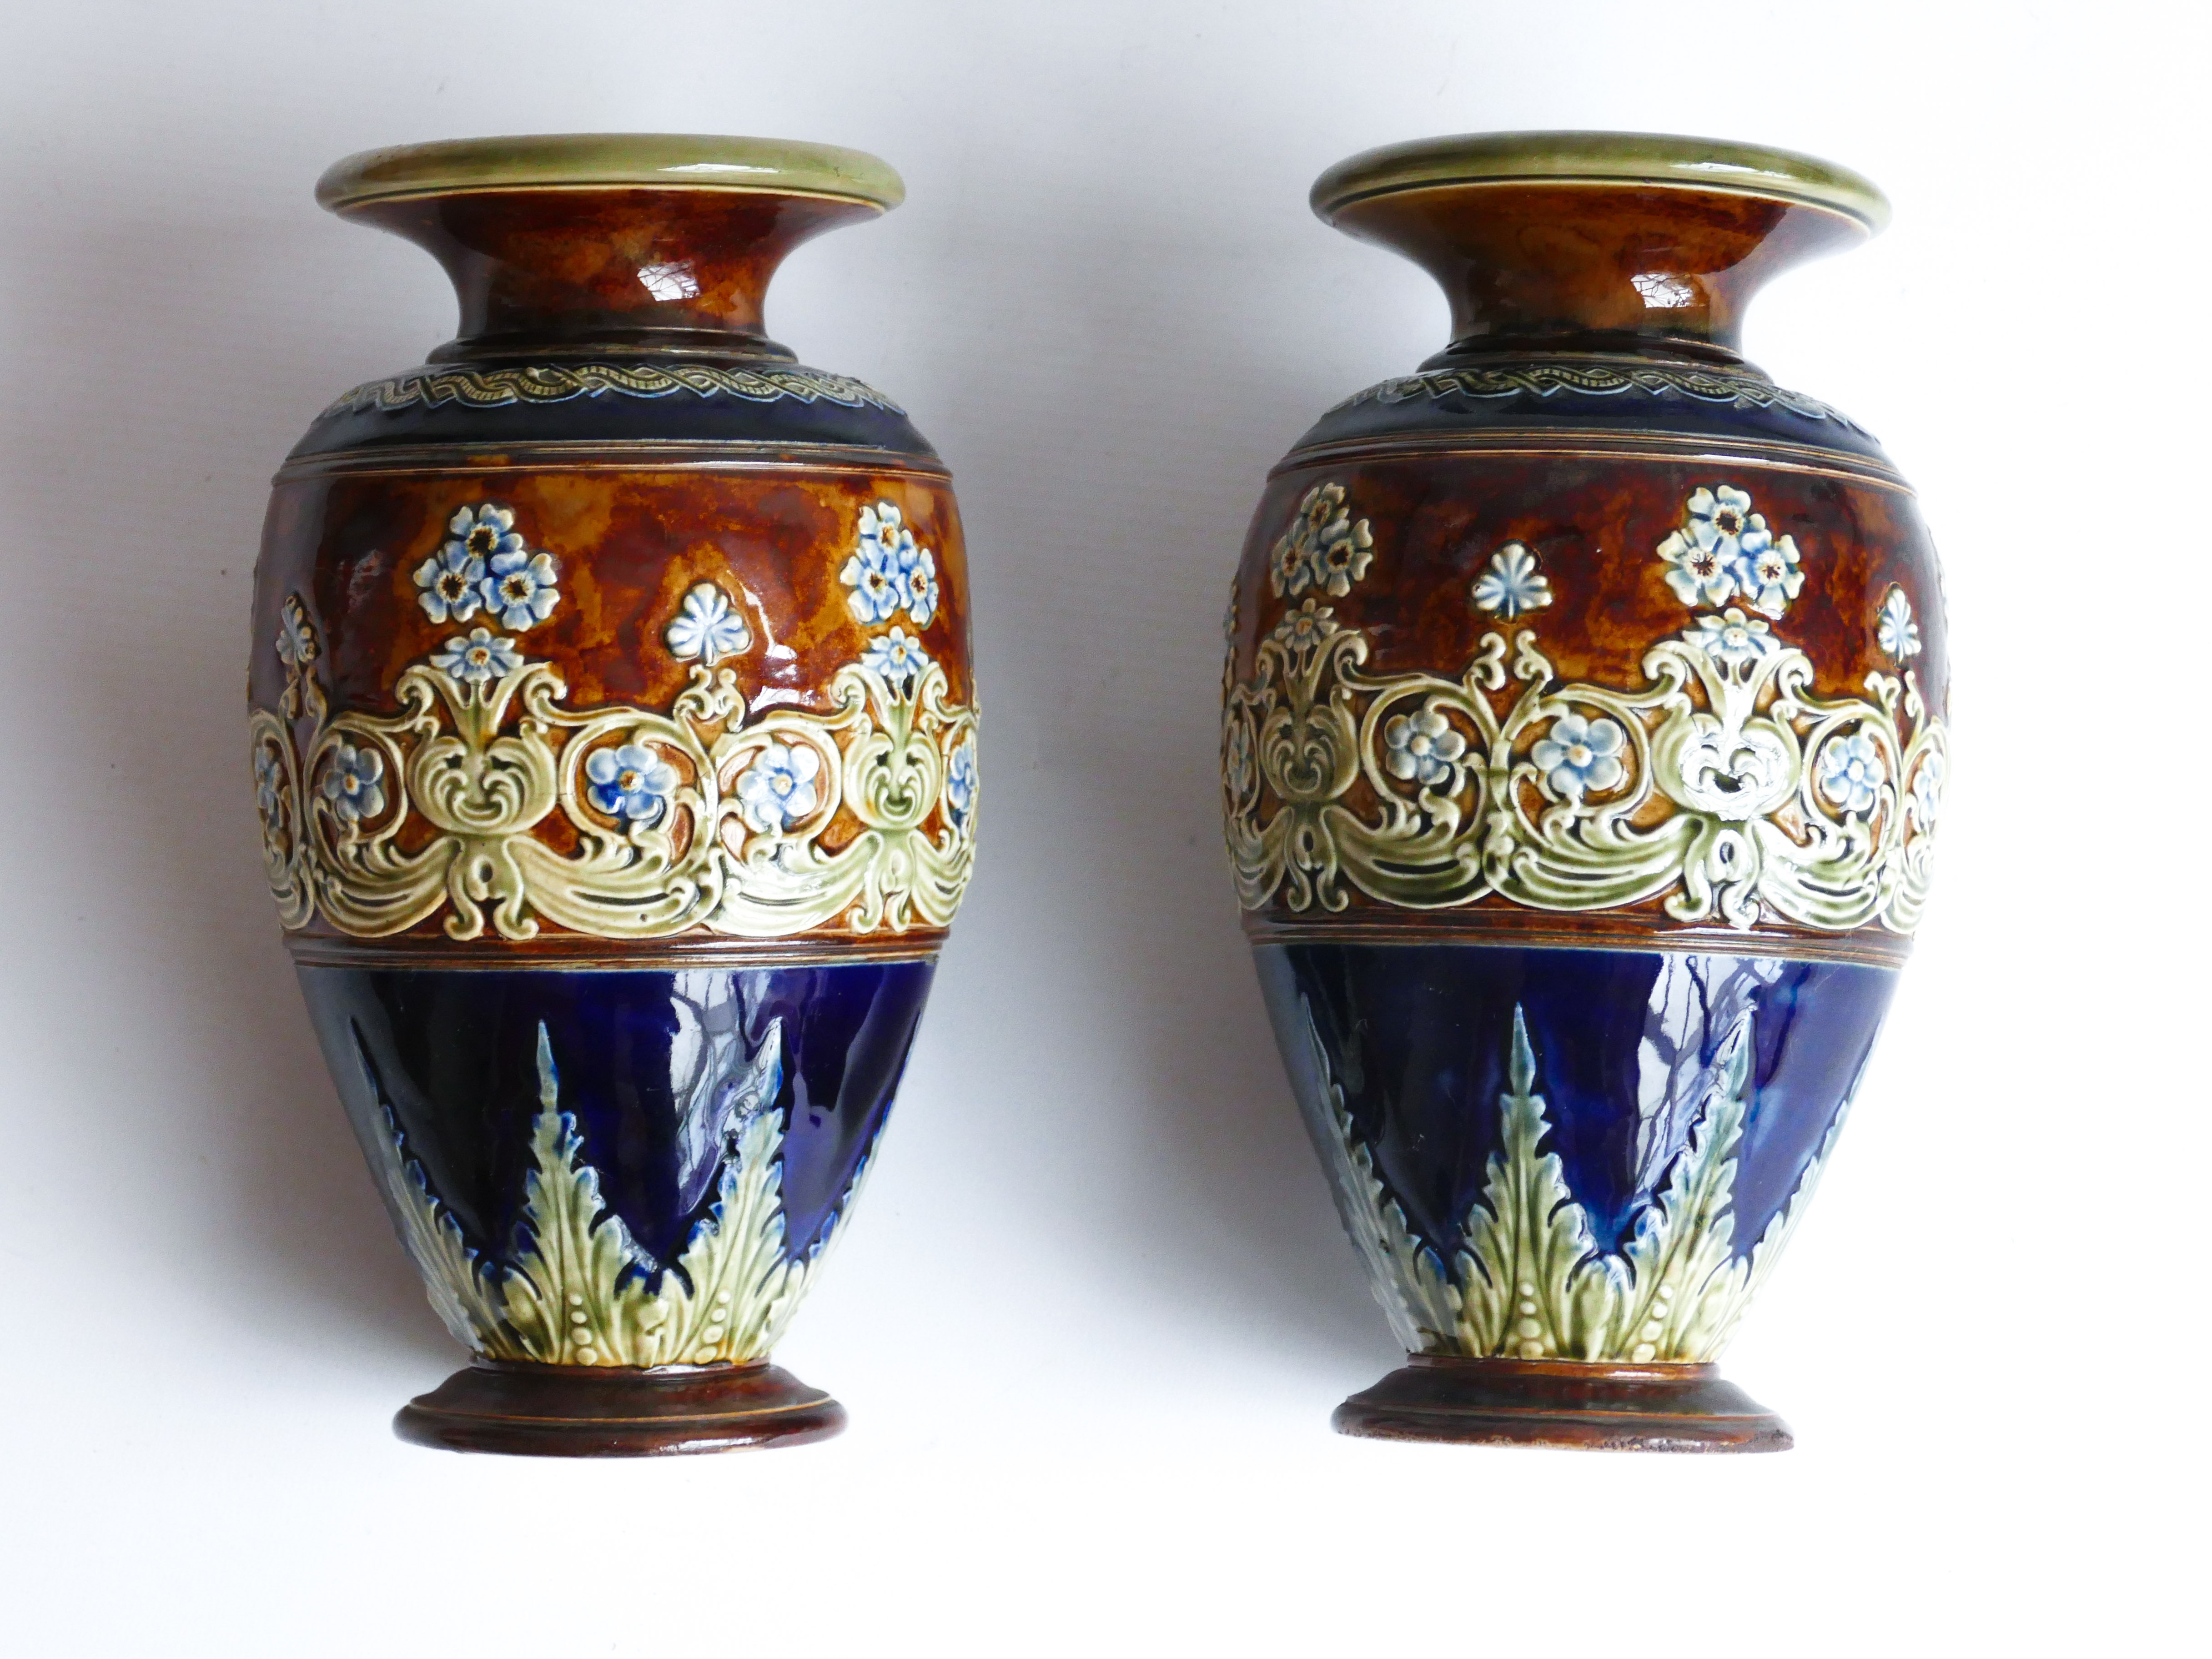 ROYAL DOULTON PAIR OF ANTIQUE VASES CHINA FLORAL DECORATION MADE IN ENGLAND LAMBETH WARE